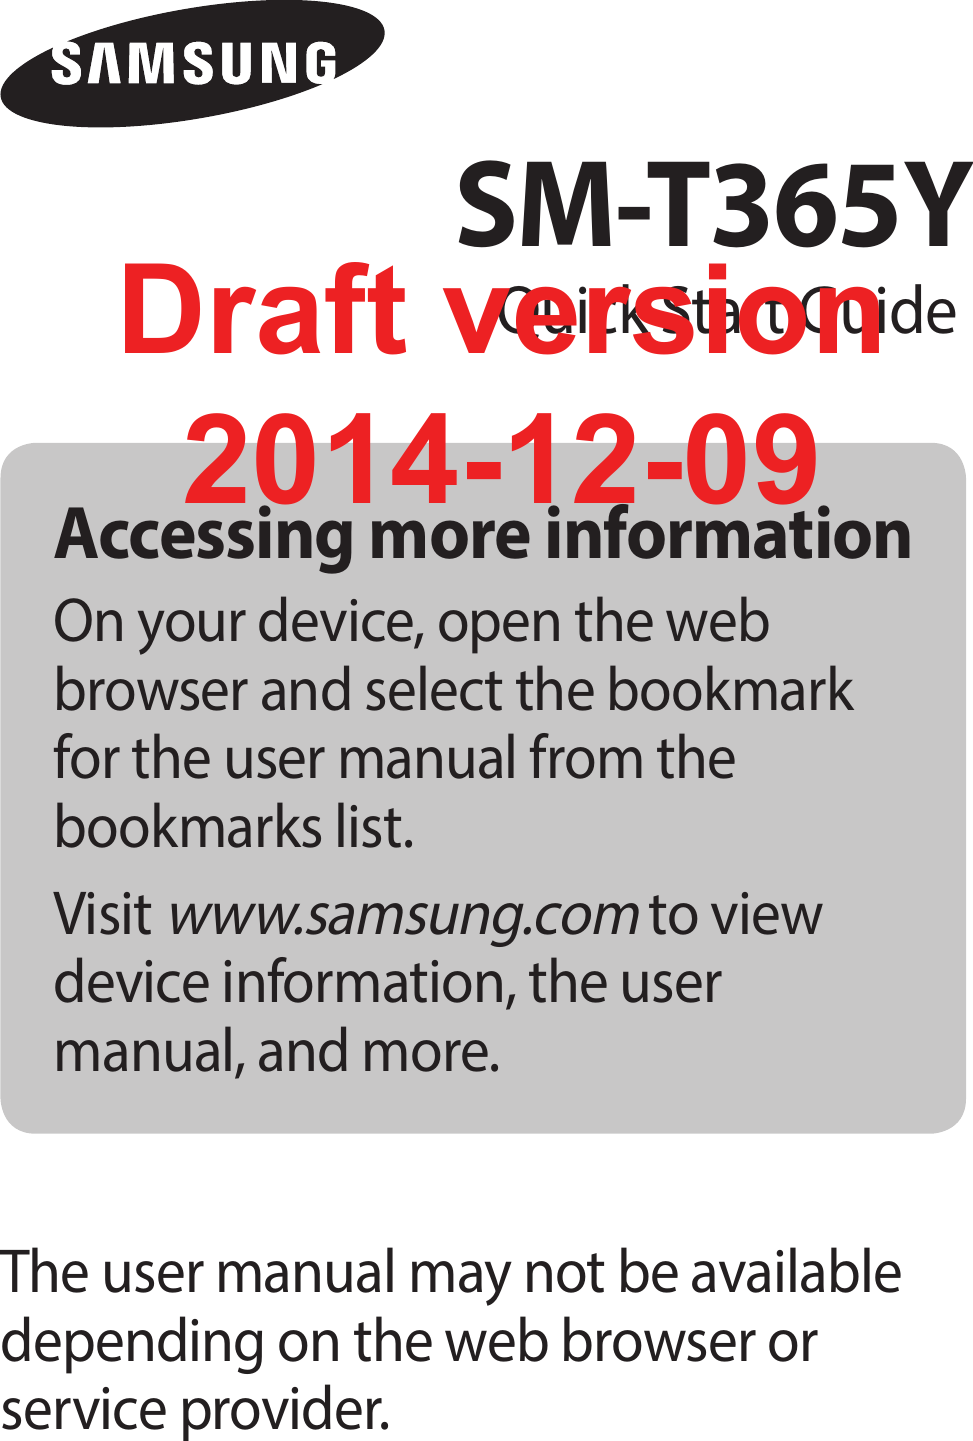 Accessing more informationOn your device, open the web browser and select the bookmark for the user manual from the bookmarks list.Visit www.samsung.com to view device information, the user manual, and more.The user manual may not be available depending on the web browser or service provider.SM-T365YQuick Start GuideDraft version2014-12-09